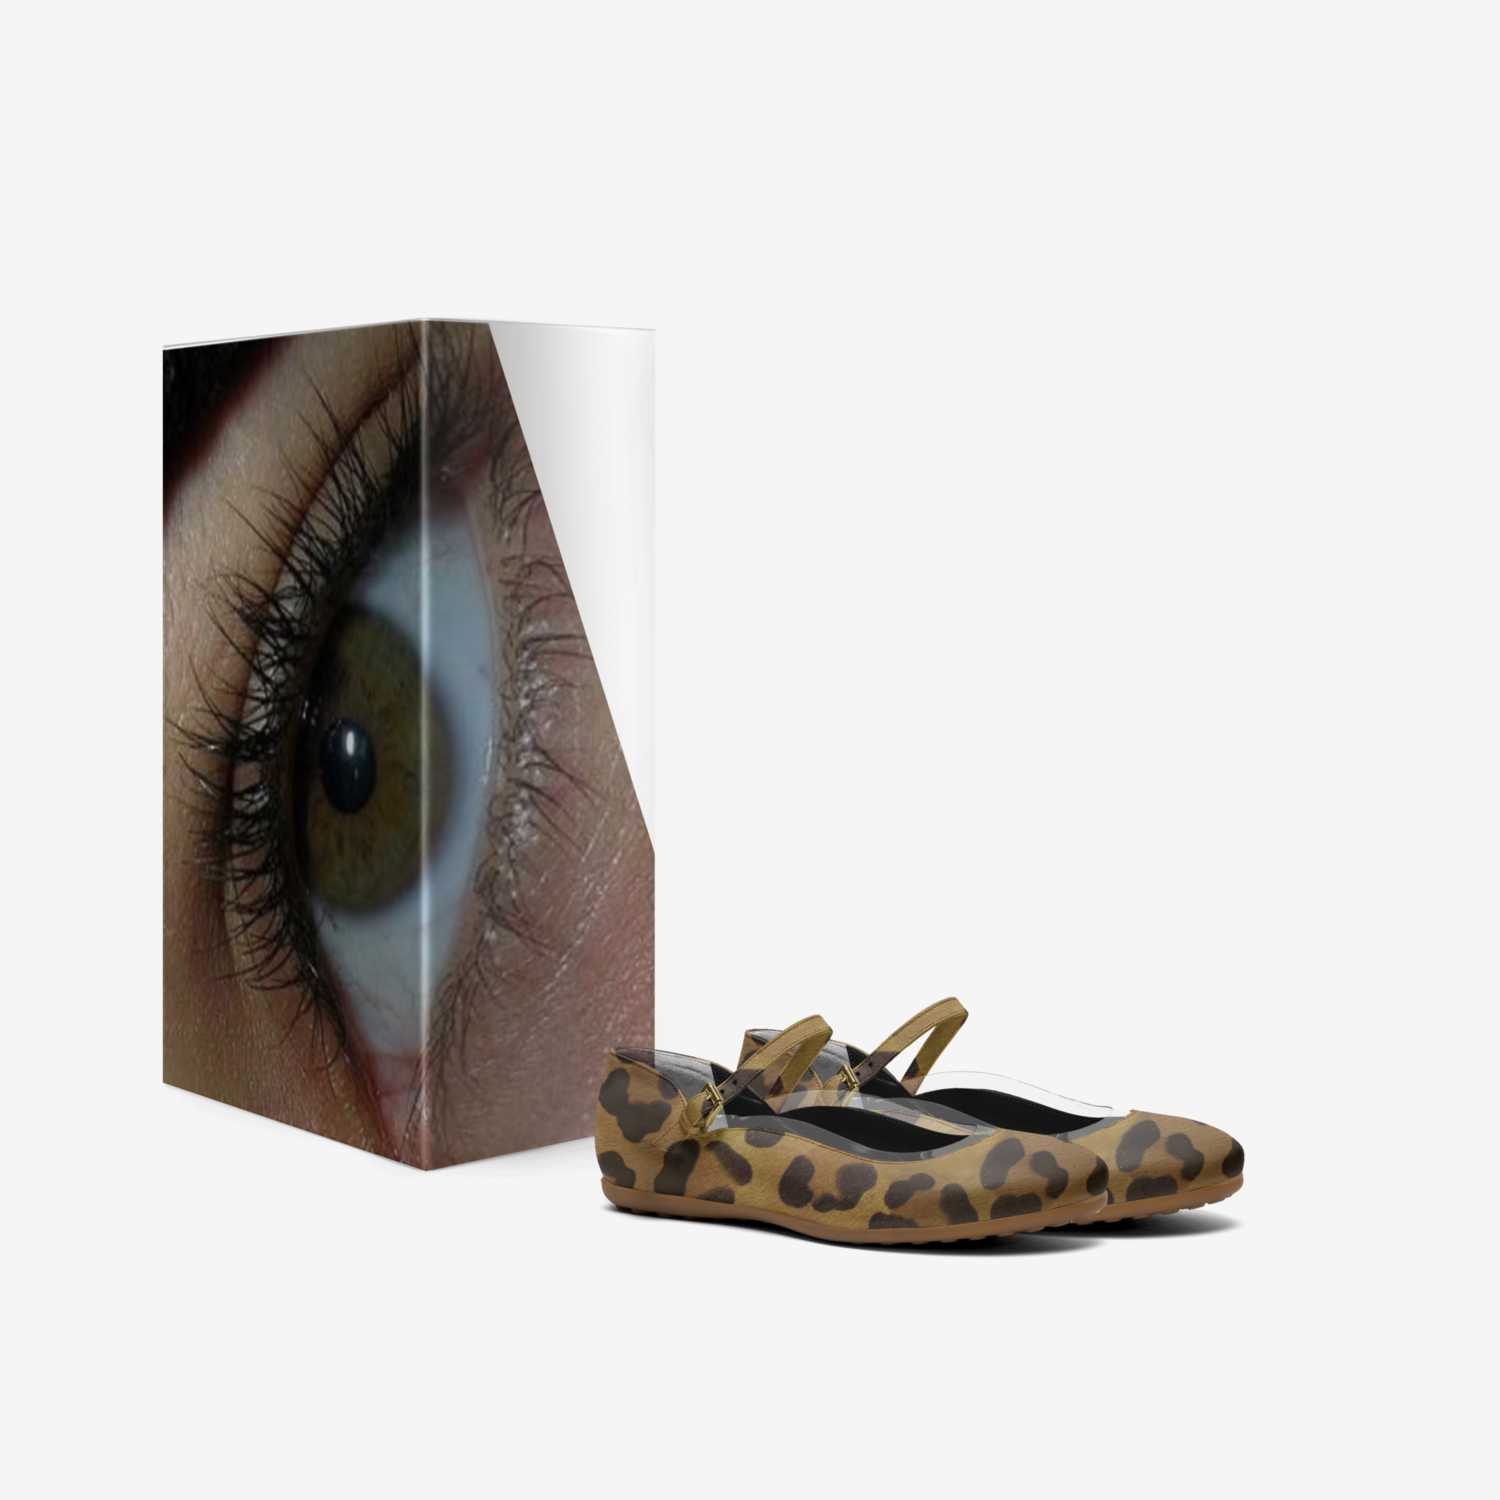 CHEETAH custom made in Italy shoes by Trey Fx | Box view